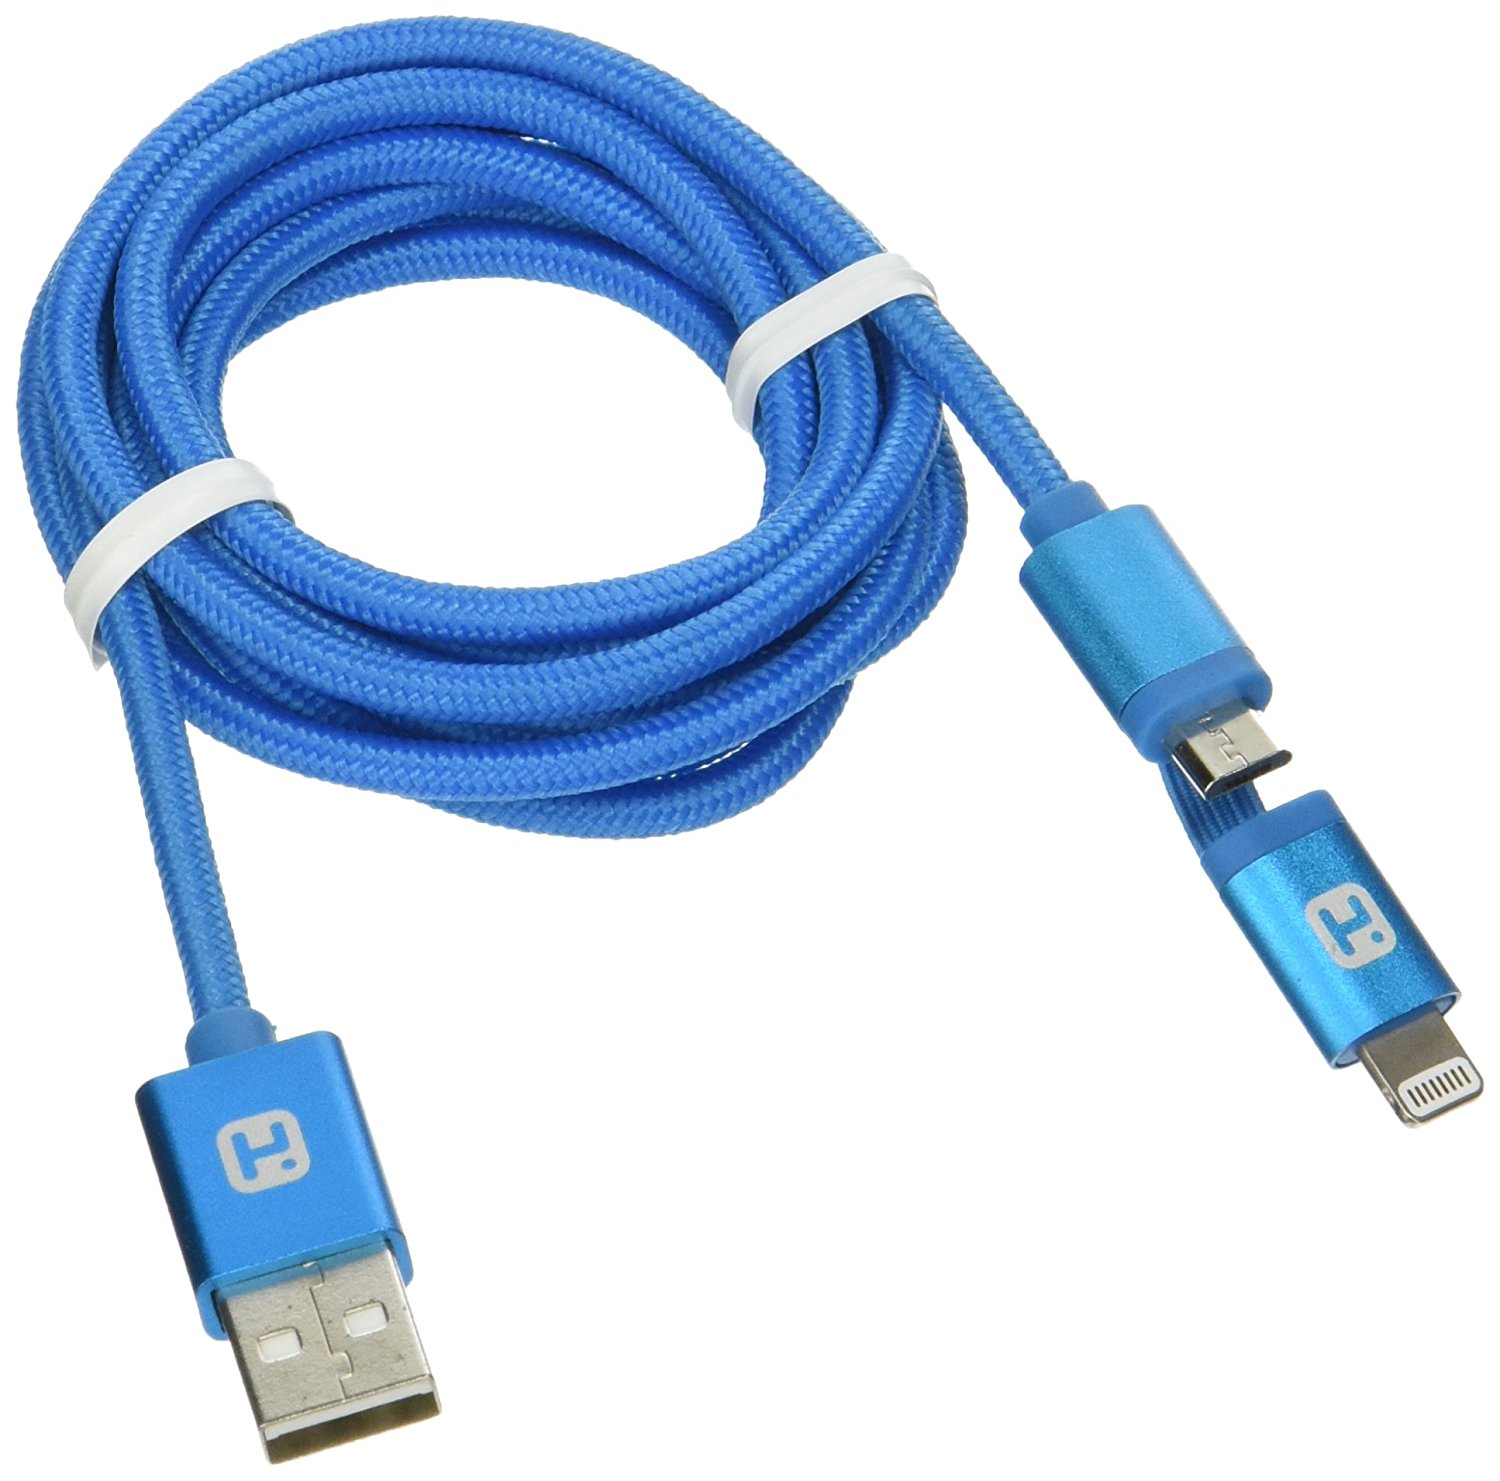 Amazon.com: iHome Micro USB Cables for Universal - Blue: Cell Phones ...